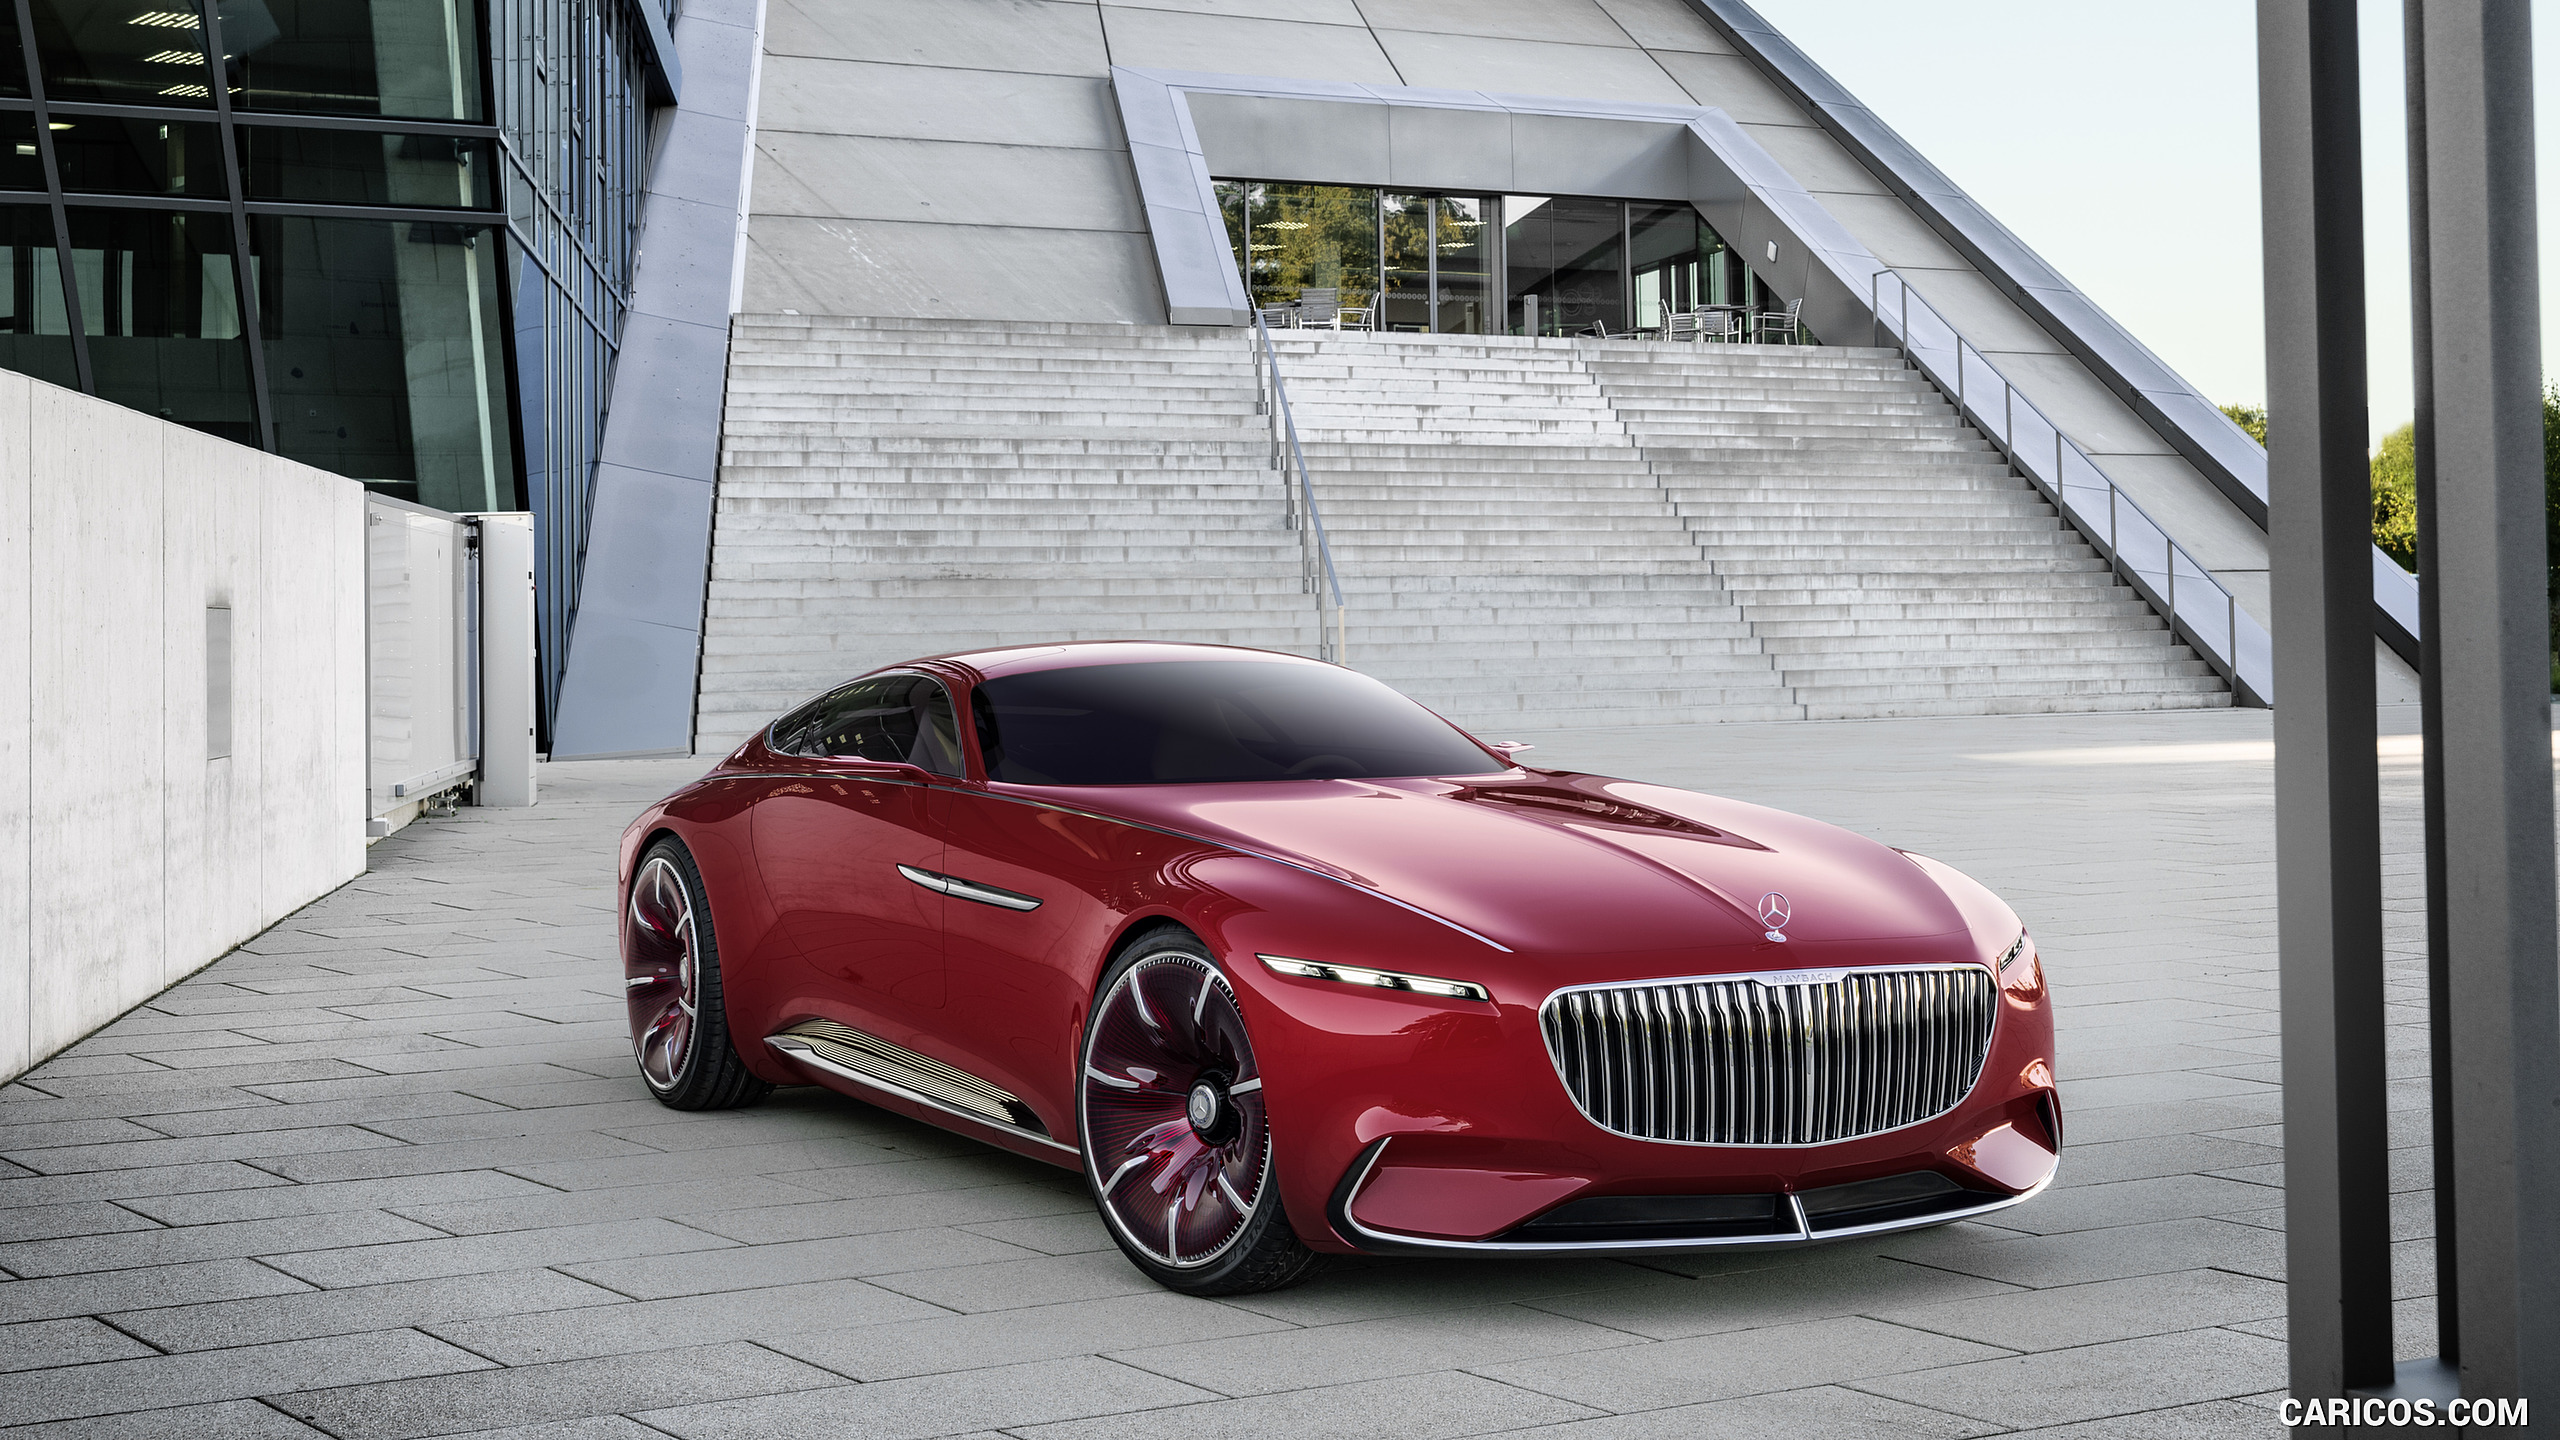 2016 Mercedes-Maybach 6 Concept - Front Three-Quarter, #29 of 31